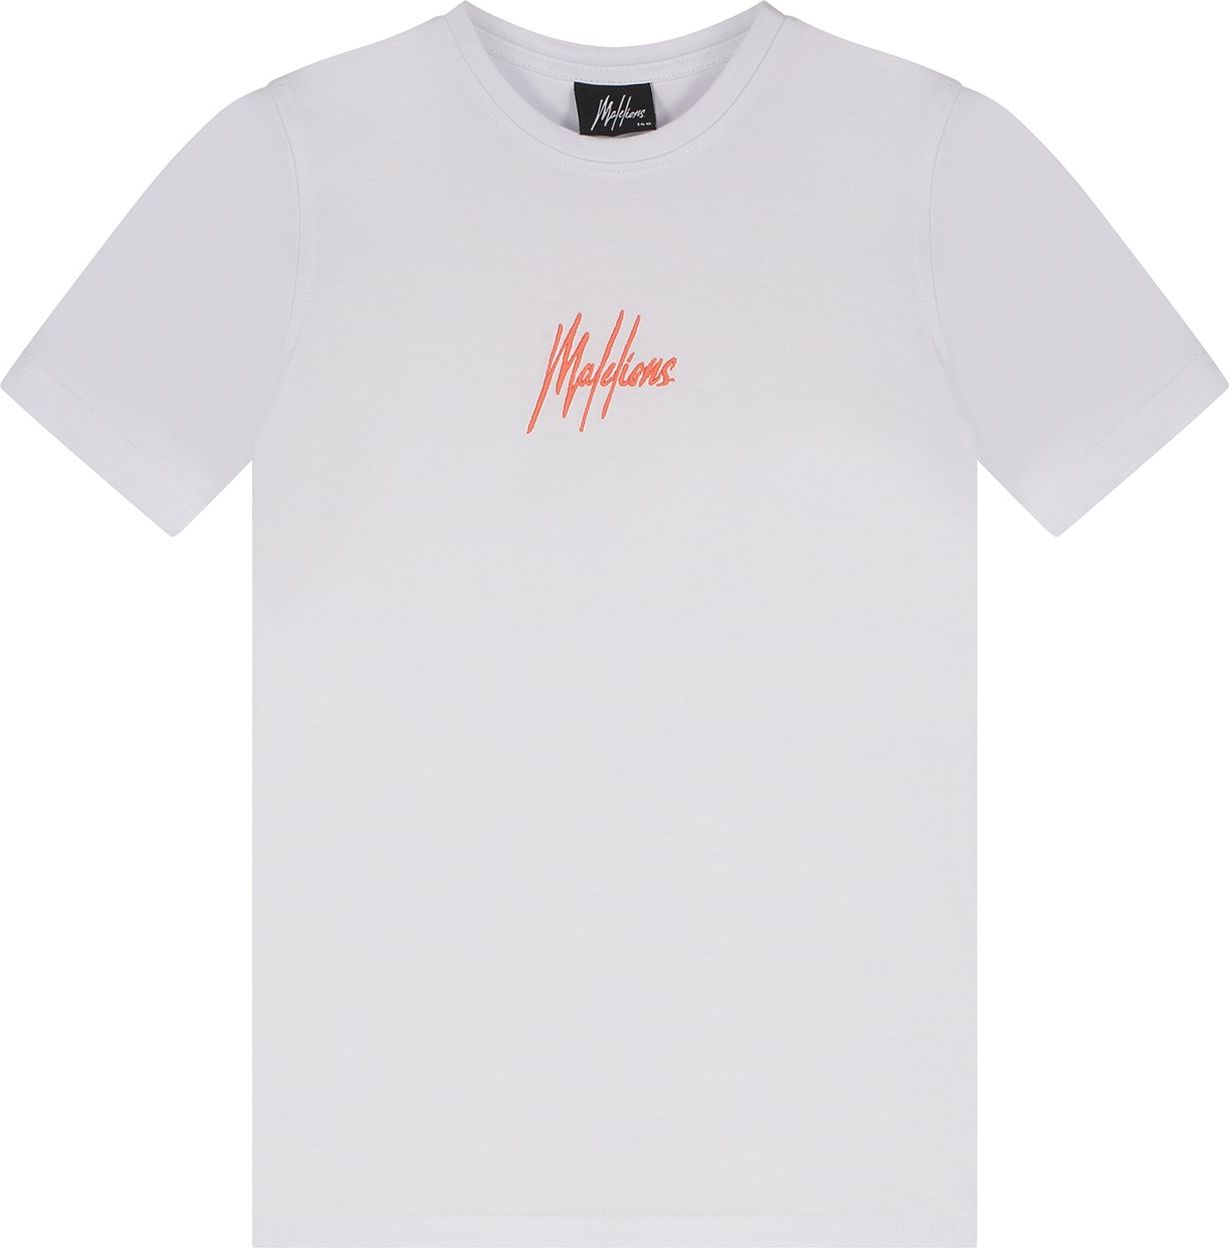 Malelions Double Signature T-Shirt-White/Peac Wit